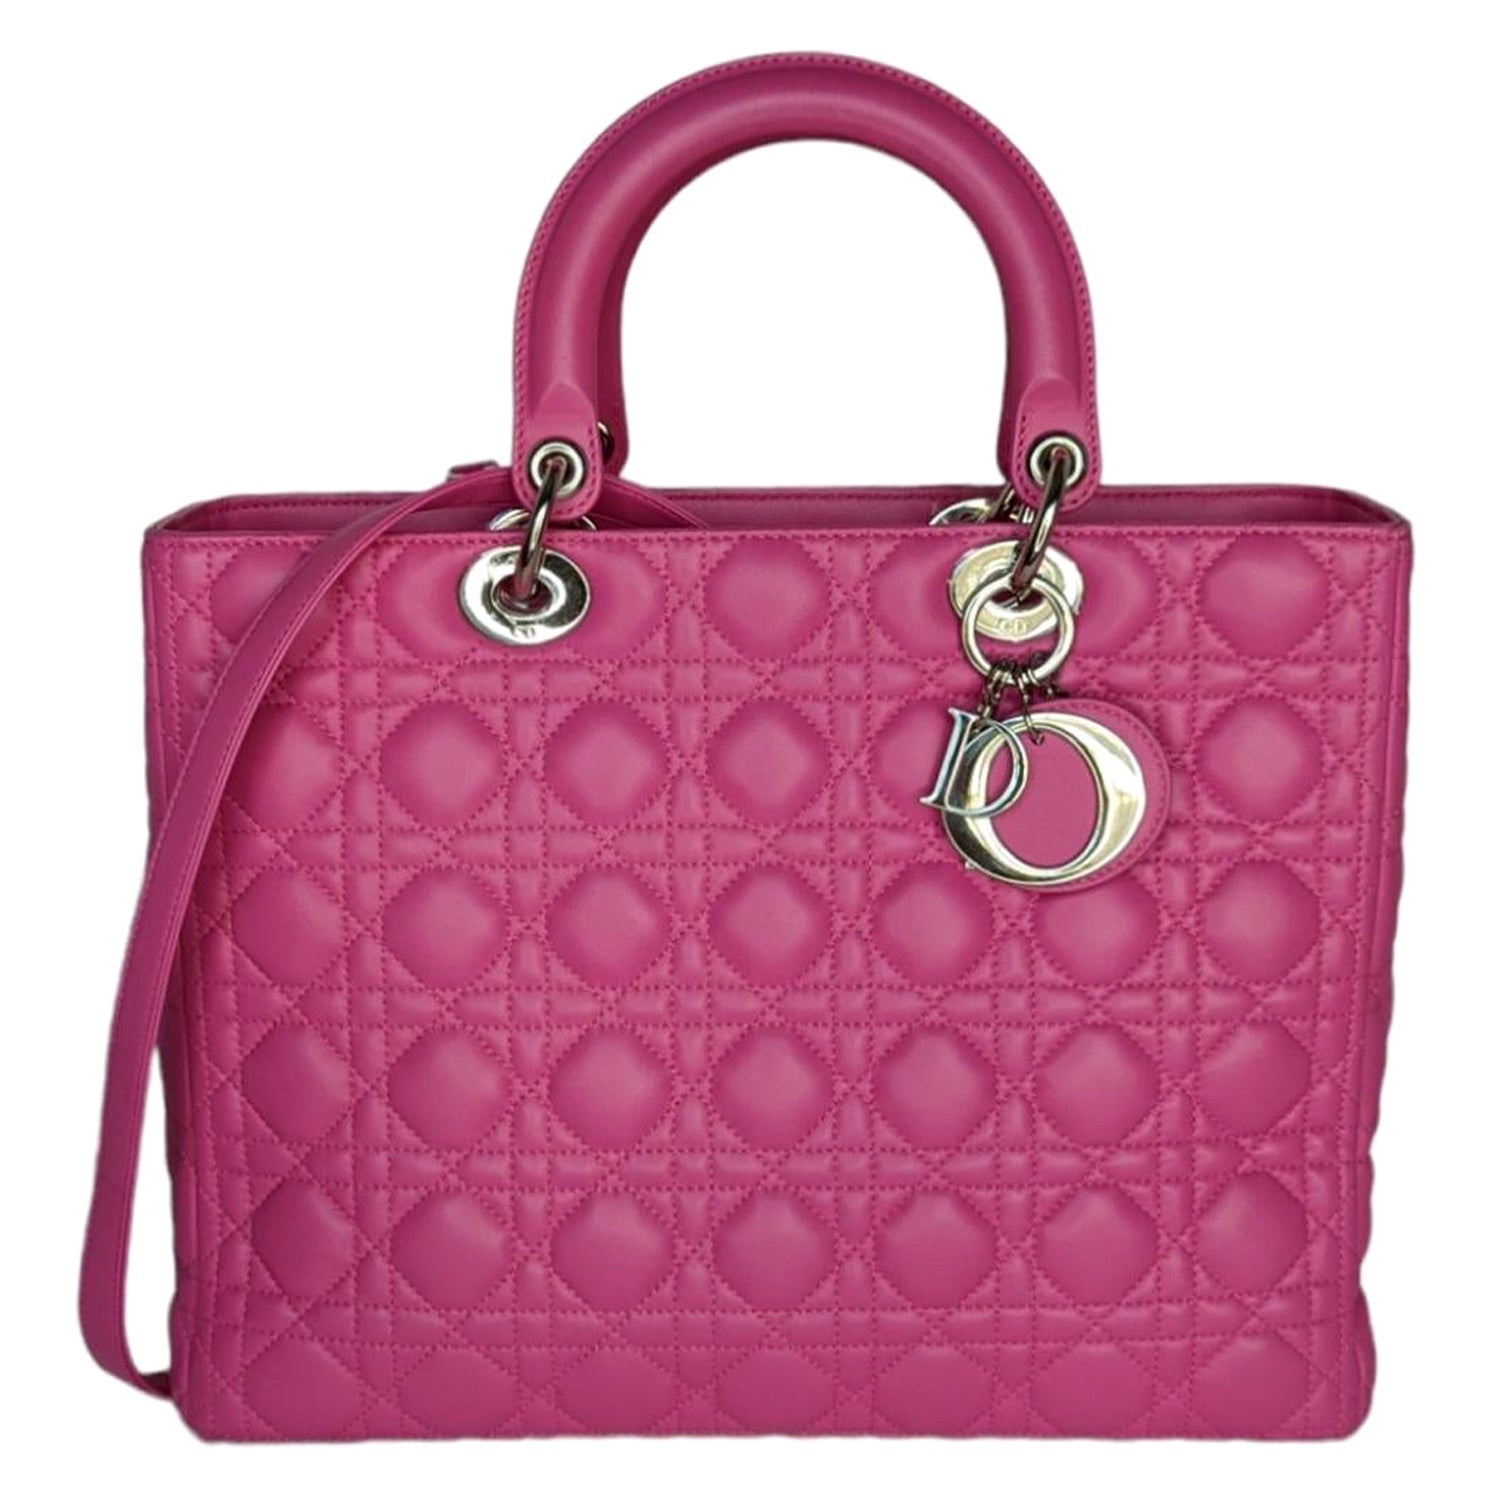 Christian Dior Pink Large Cannage Lady Dior Tote